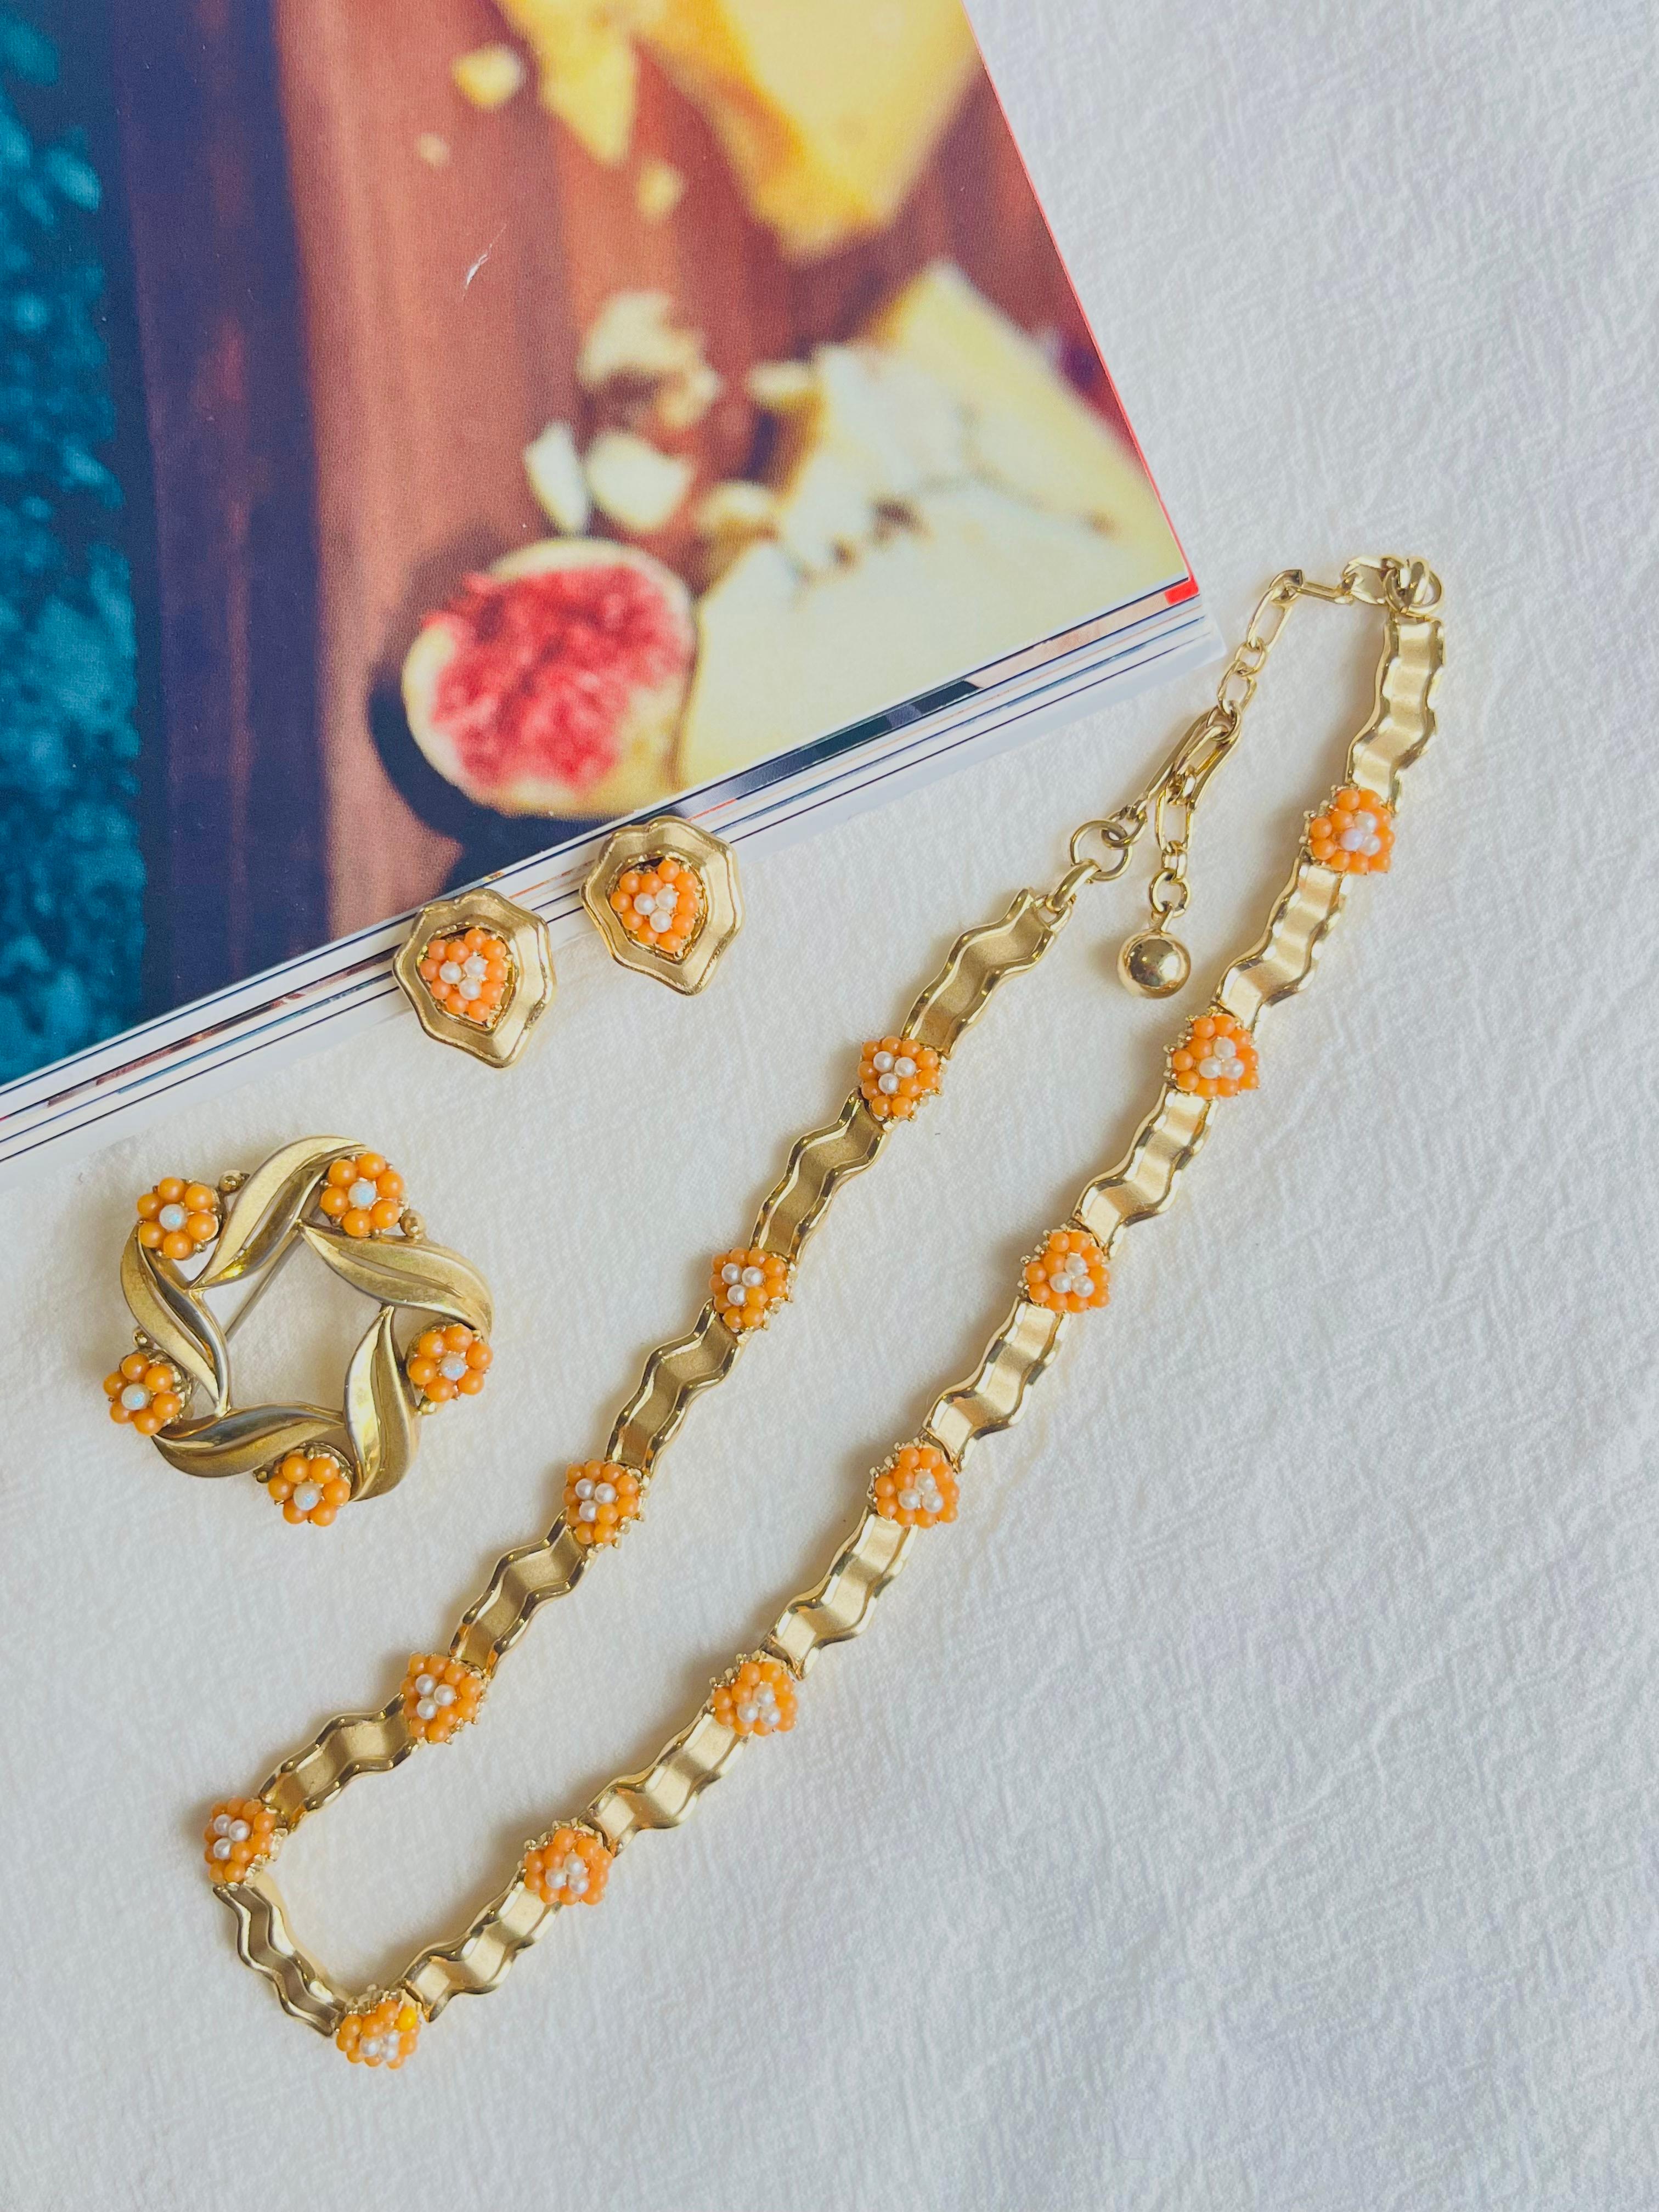 Crown Trifari 1950s Beaded Orange Coral White Pearls Flowers Jewellery Set In Good Condition For Sale In Wokingham, England